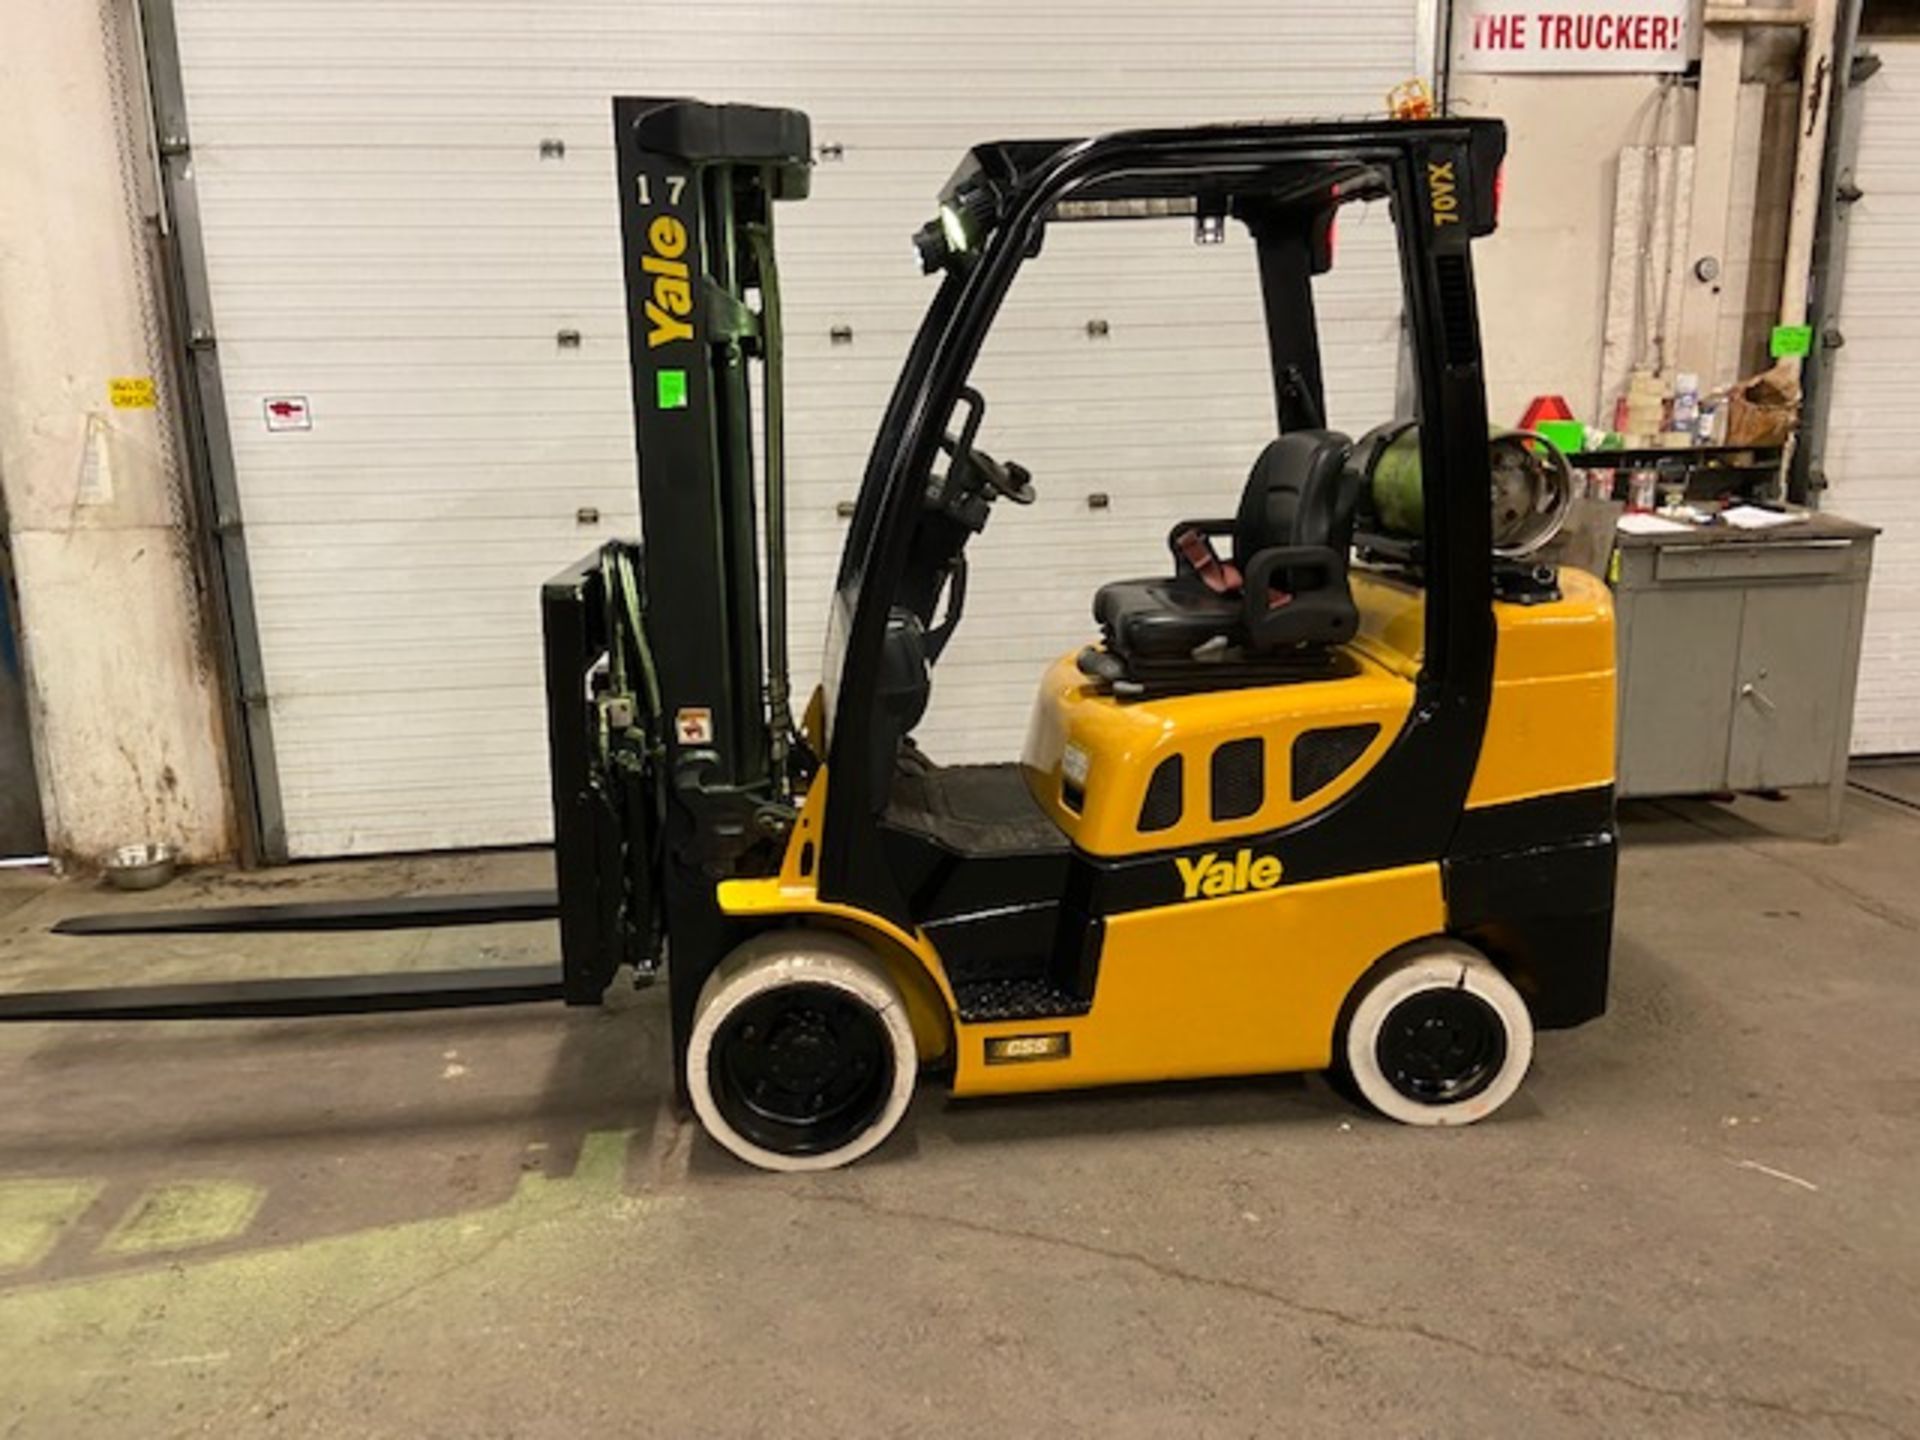 FREE CUSTOMS - 2017 Yale 7000lbs Capacity GLC70 Forklift LPG (propane) with 3-STAGE MAST with